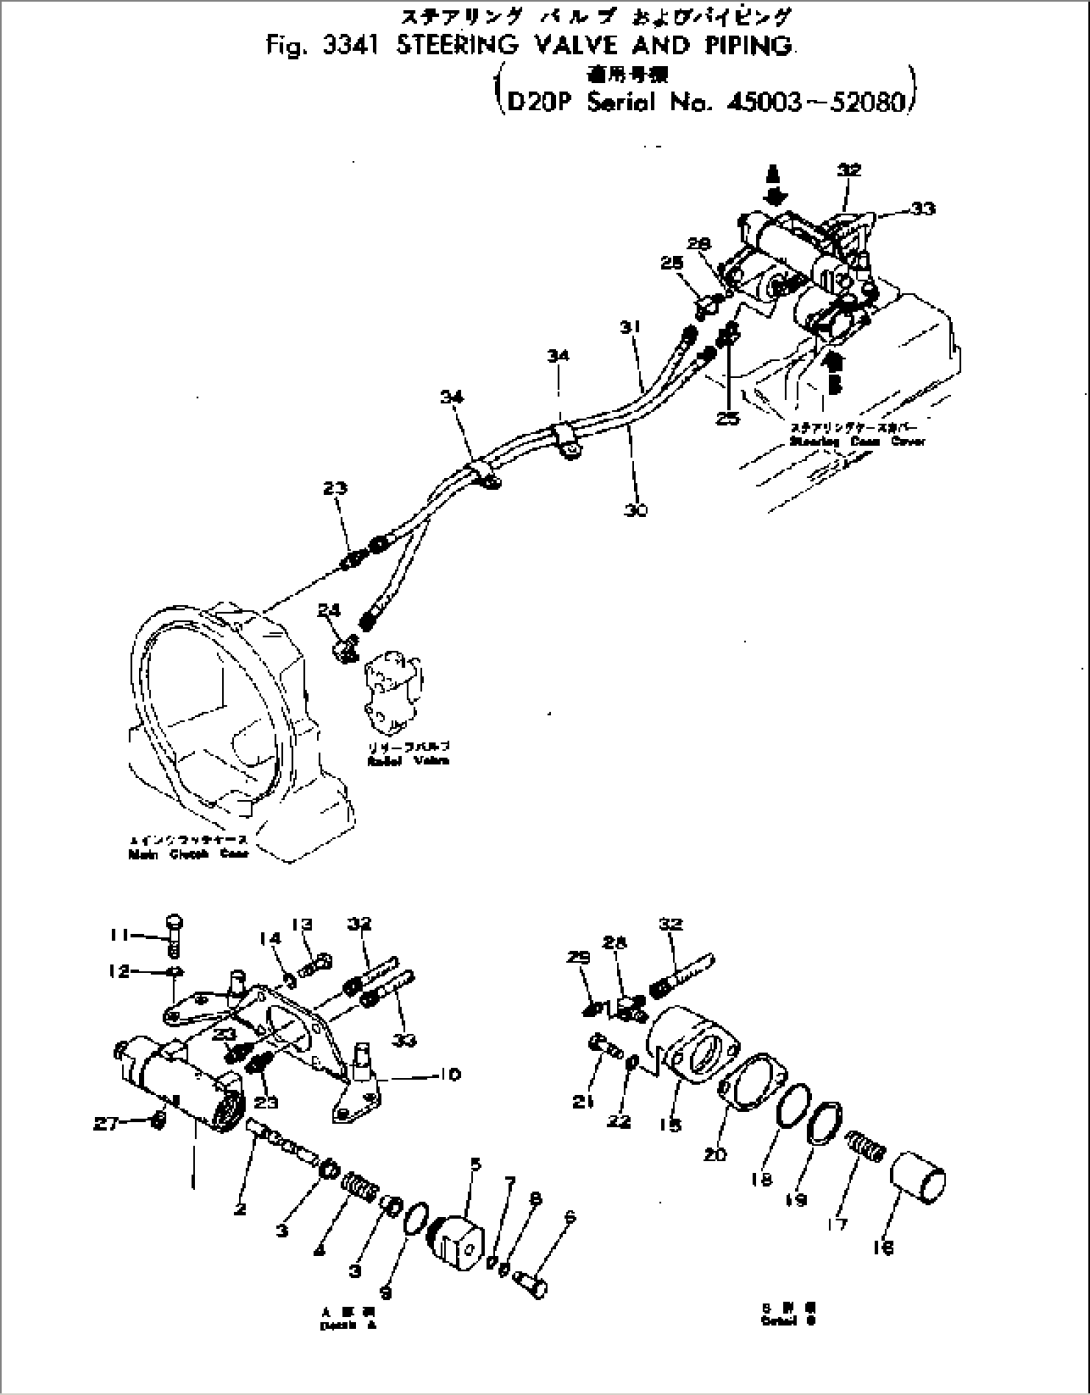 STEERING VALVE AND PIPING(#45003-52080)